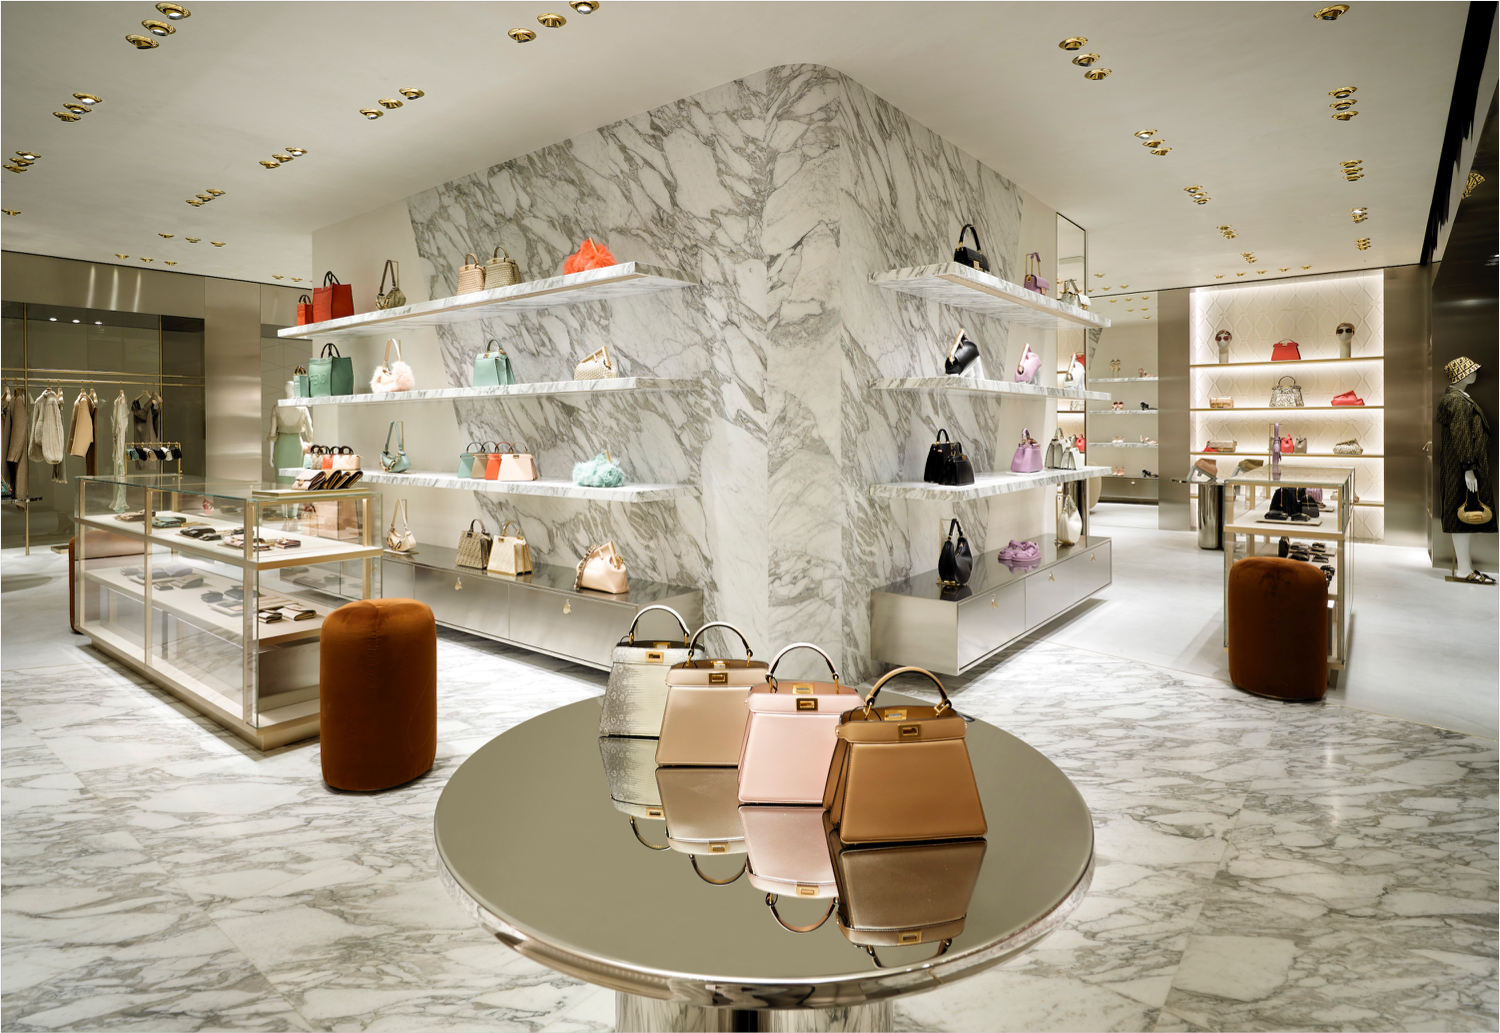 Louis Vuitton Store in a El Corte Ingles Shopping Mall in